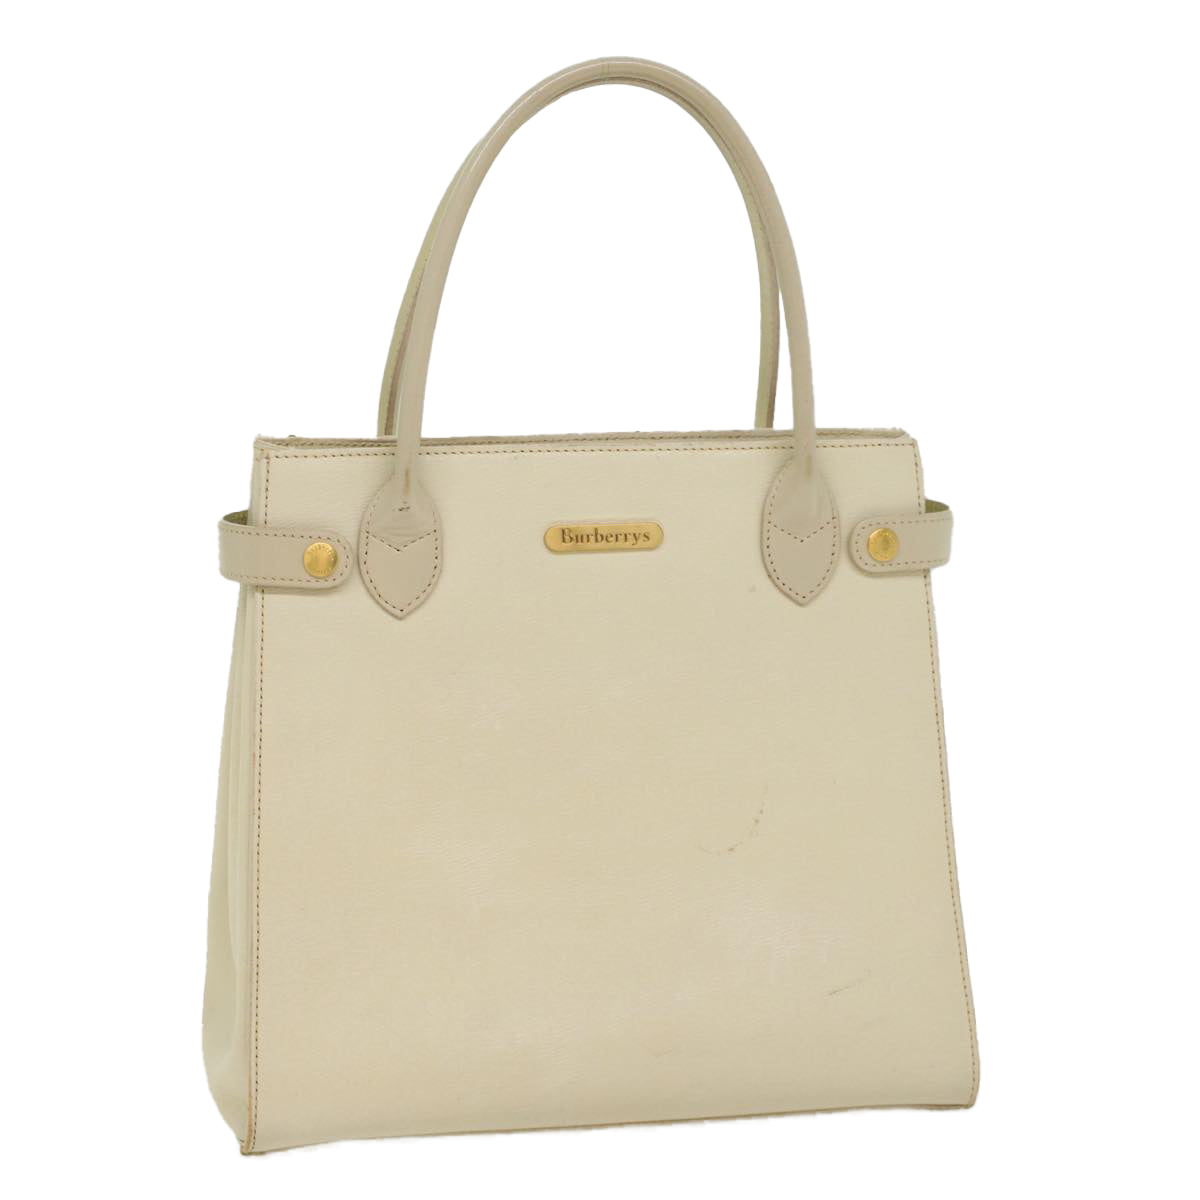 Burberrys Tote Bag Leather White Auth bs8607